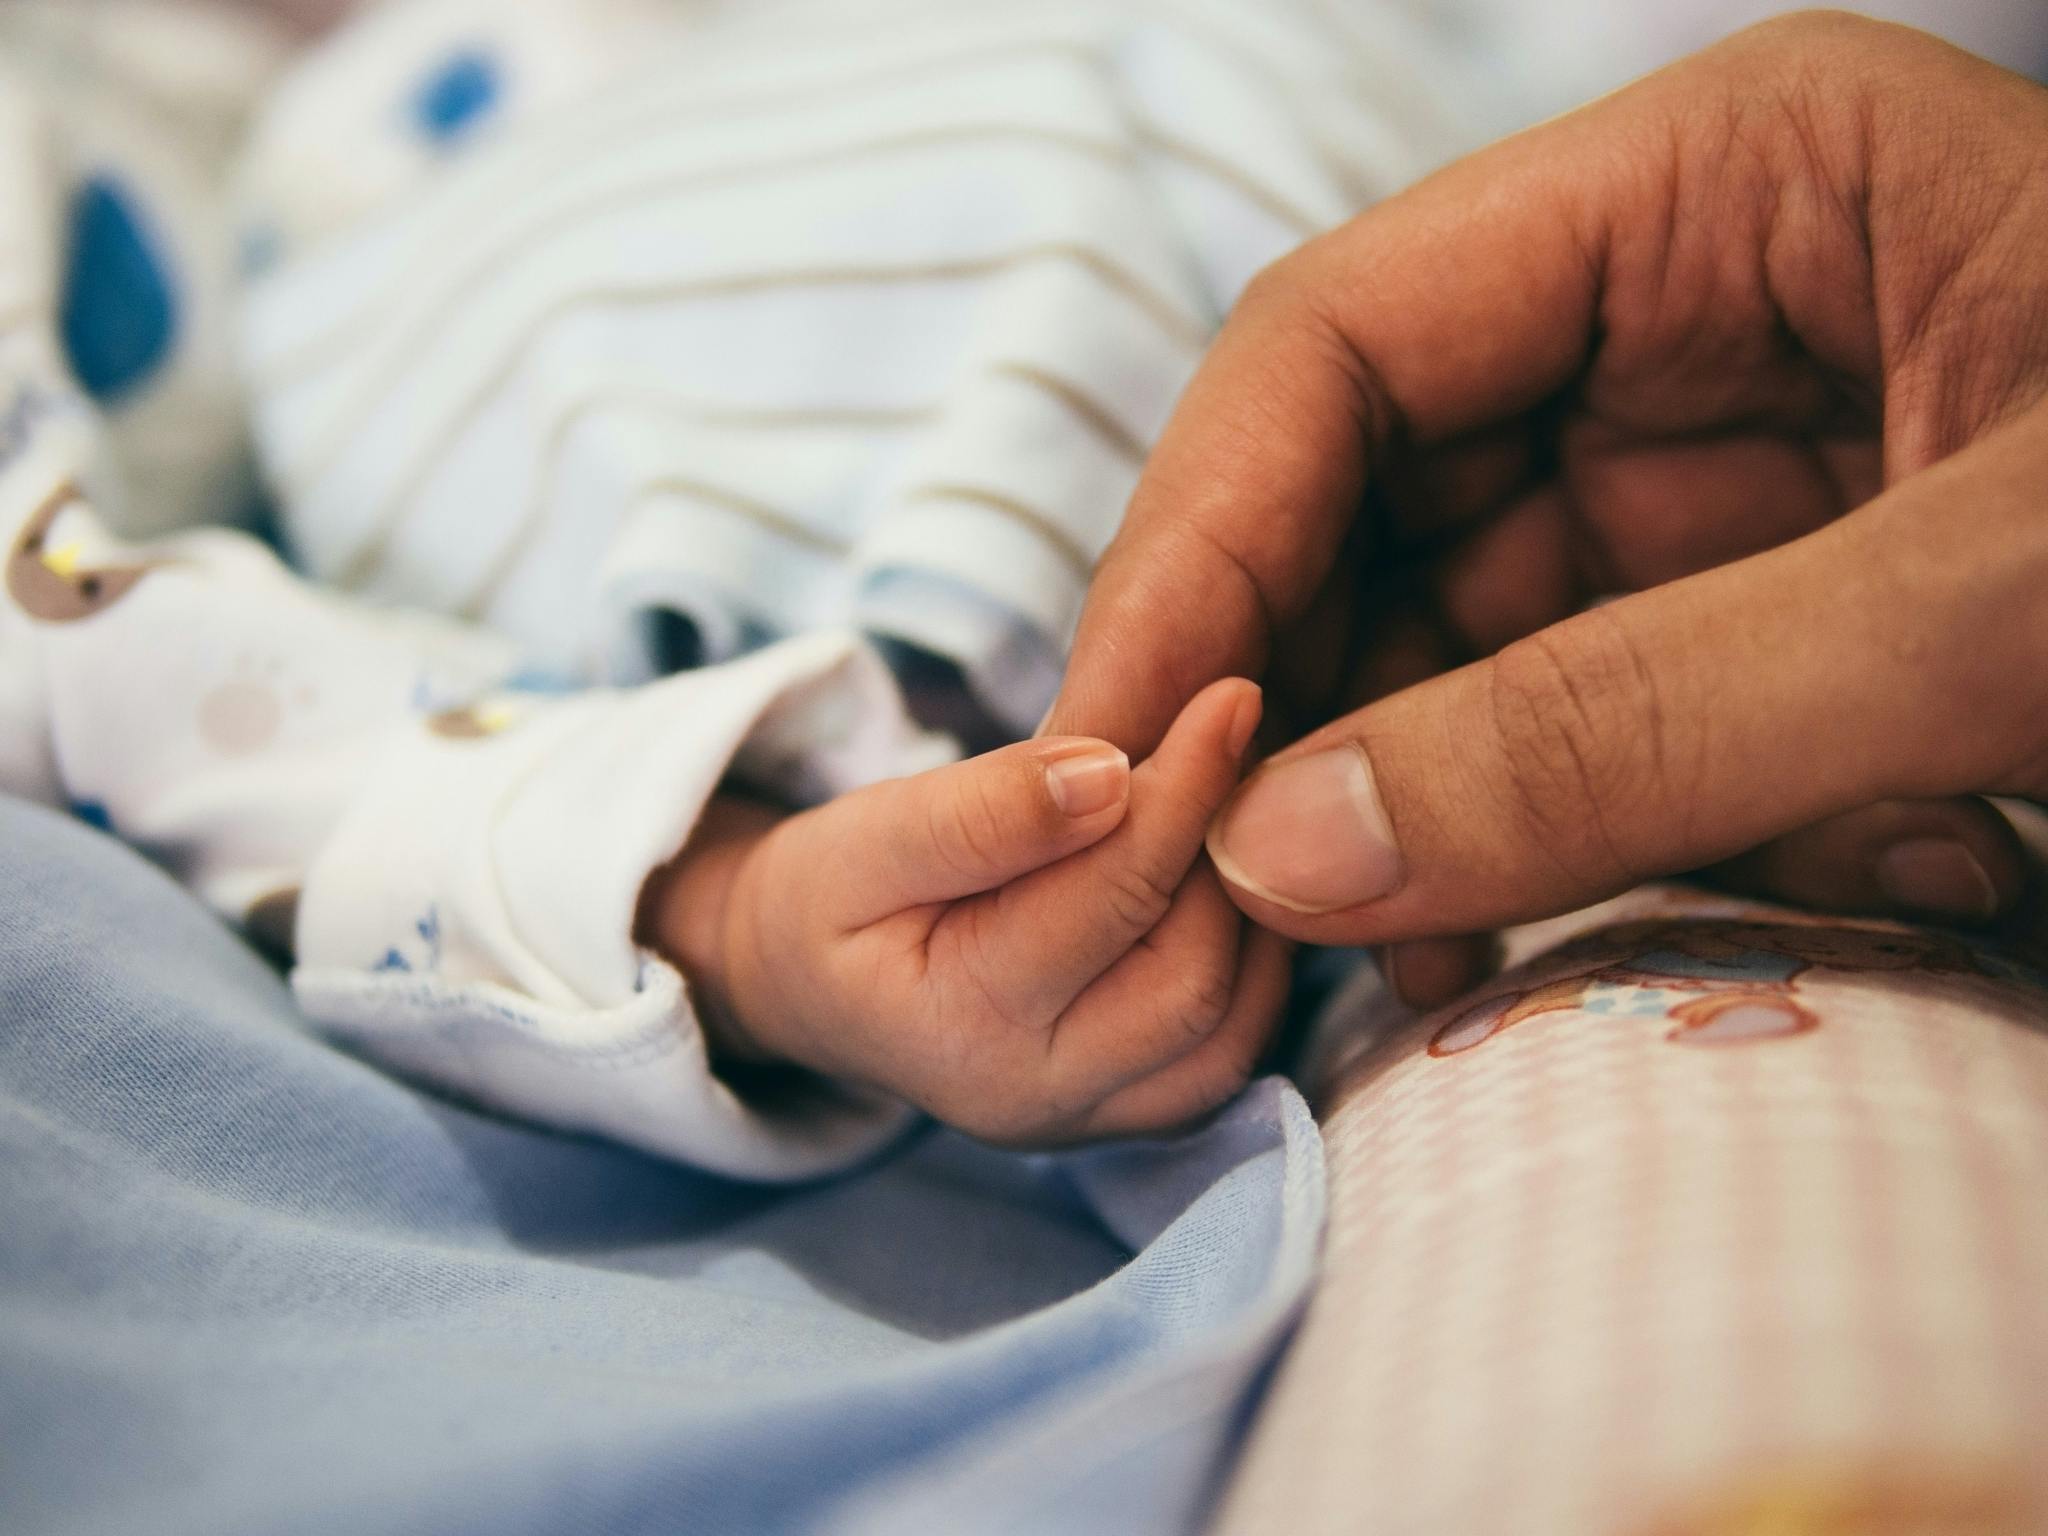 Parent holding a newborn baby's hand in a Children's Hospital